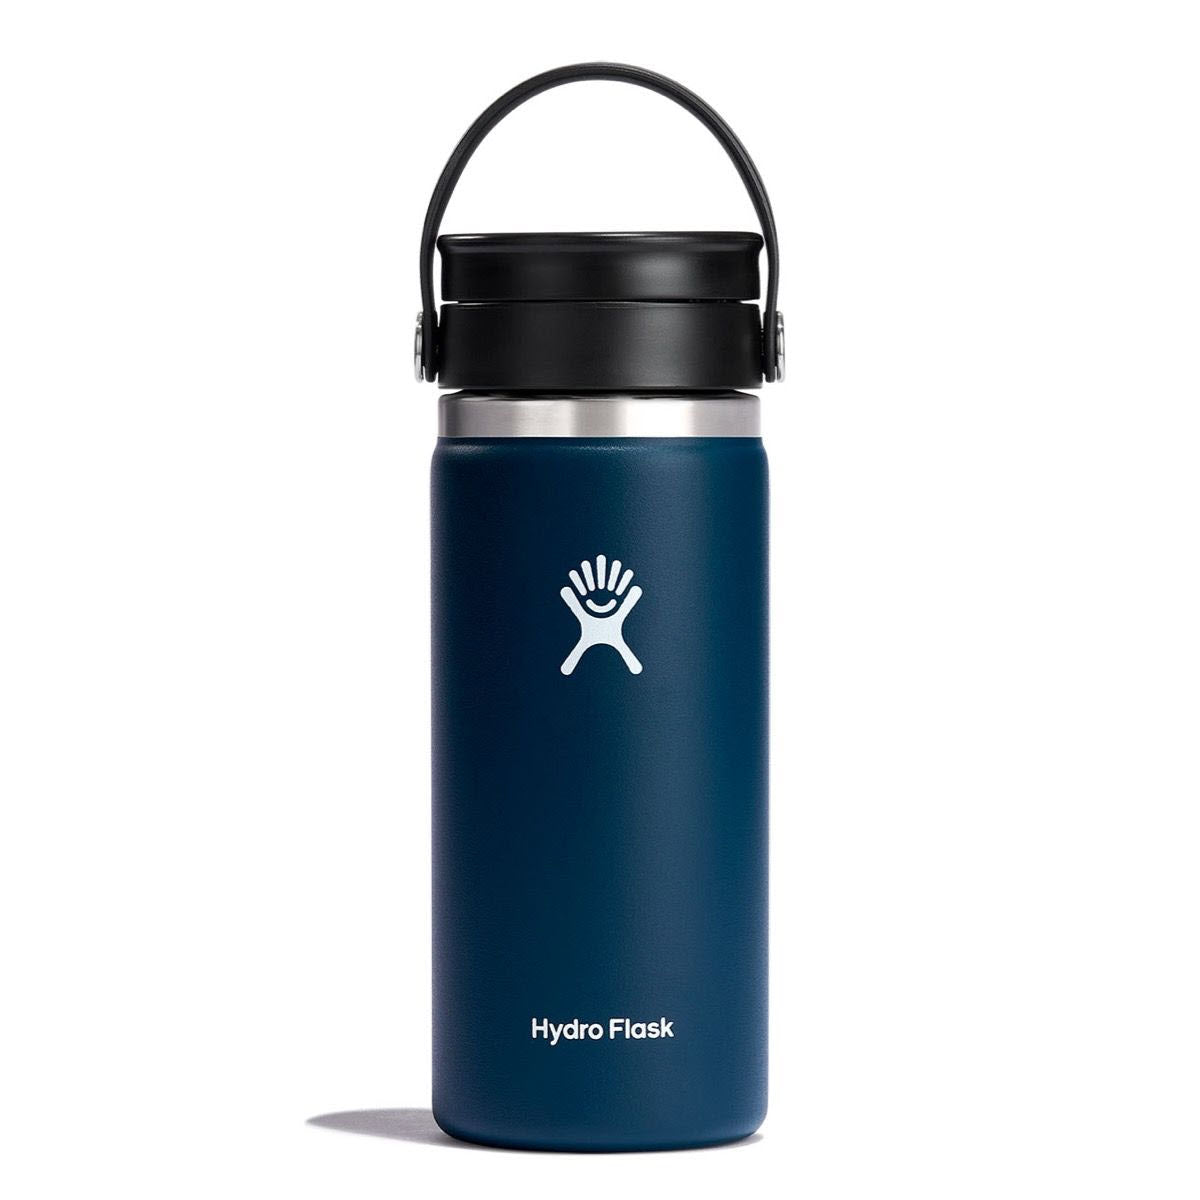 A blue Hydro Flask Wide Mouth Coffee 16oz Indigo water bottle with a leak-free black lid and handle, featuring a white logo on the front.